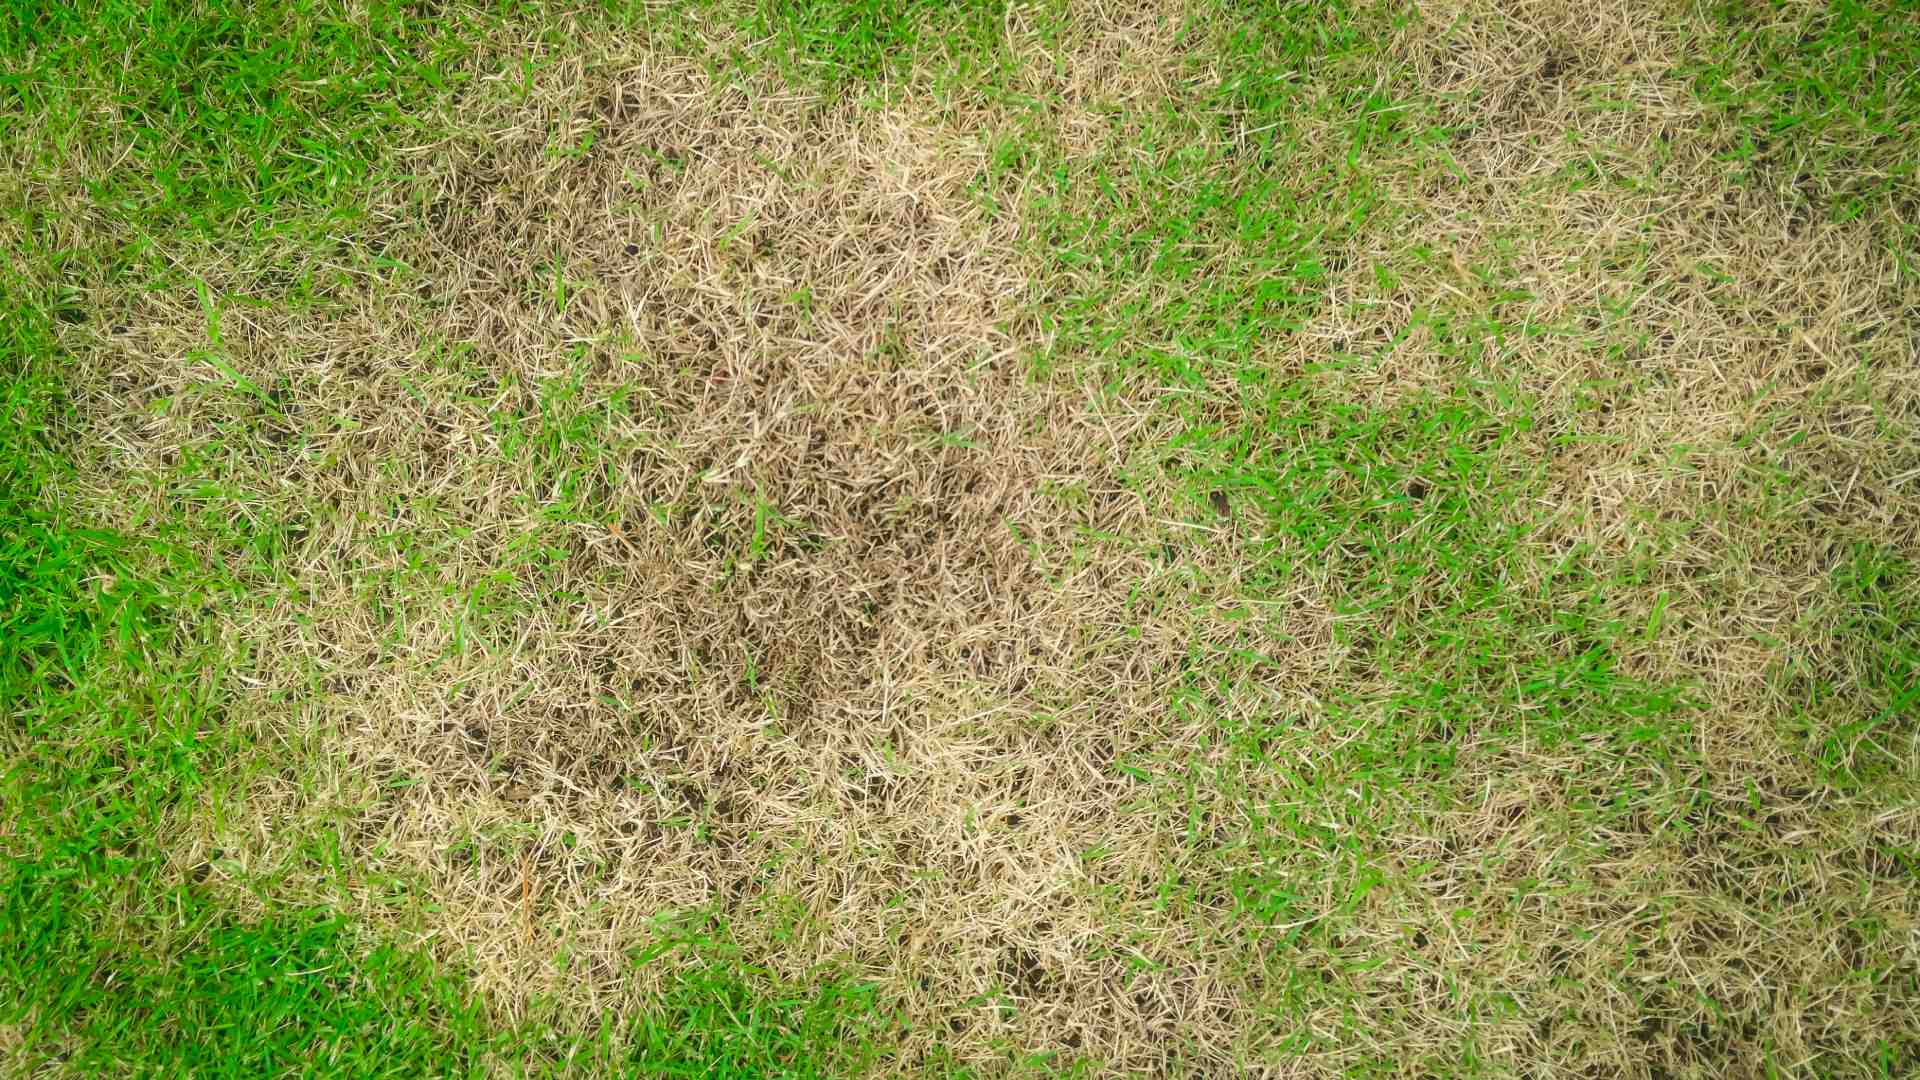 Brown patch lawn disease found in client's property in Lansing, MI.